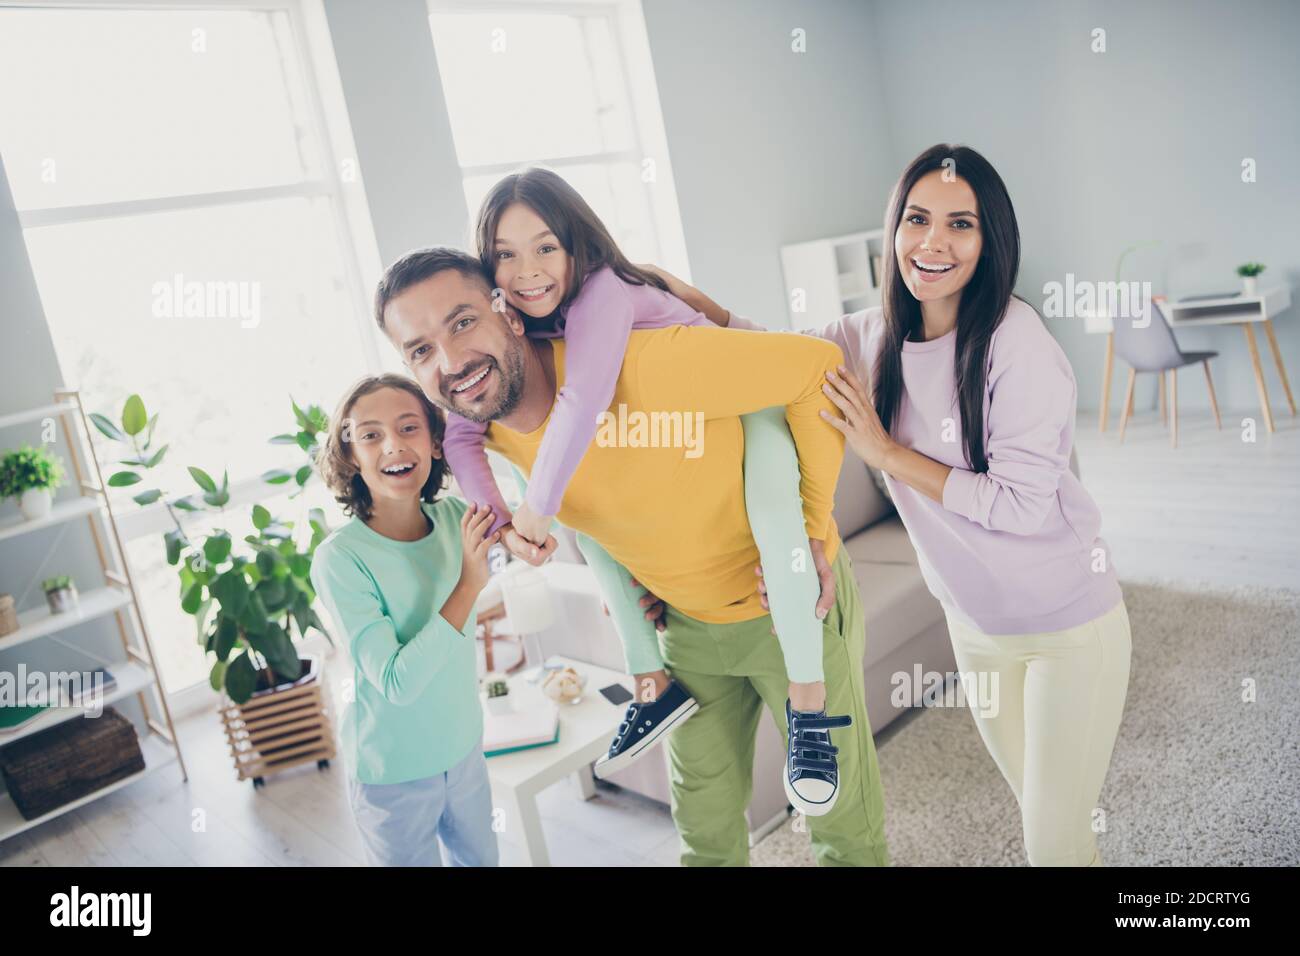 Photo of full family four members dad hold piggy back daughter have fun beaming smile wear colorful pullover in living room indoors Stock Photo